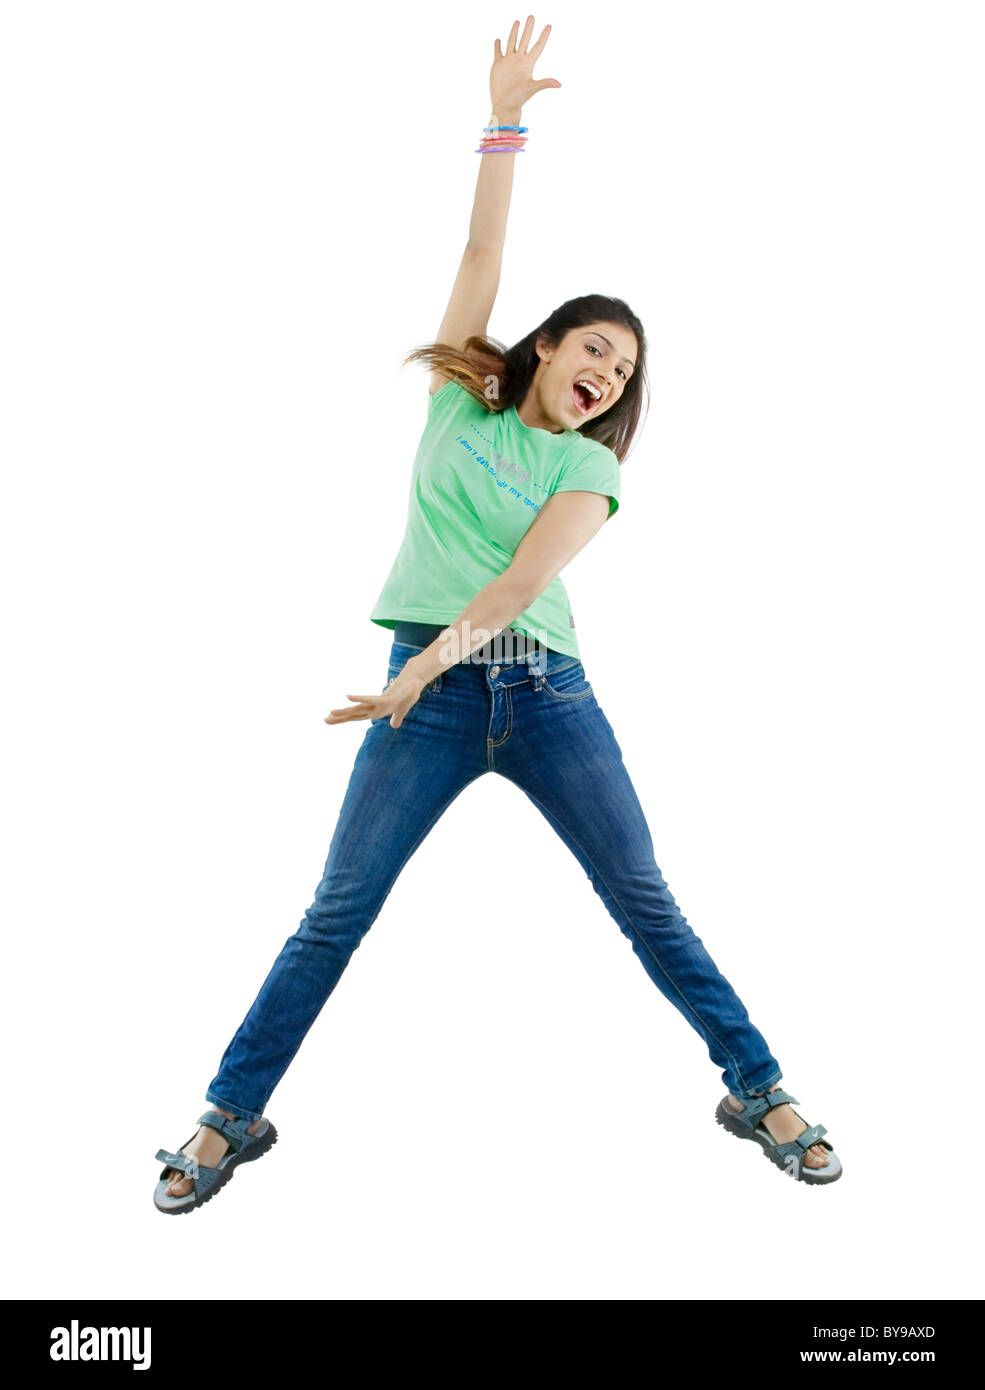 Girl jumping in the air Stock Photo